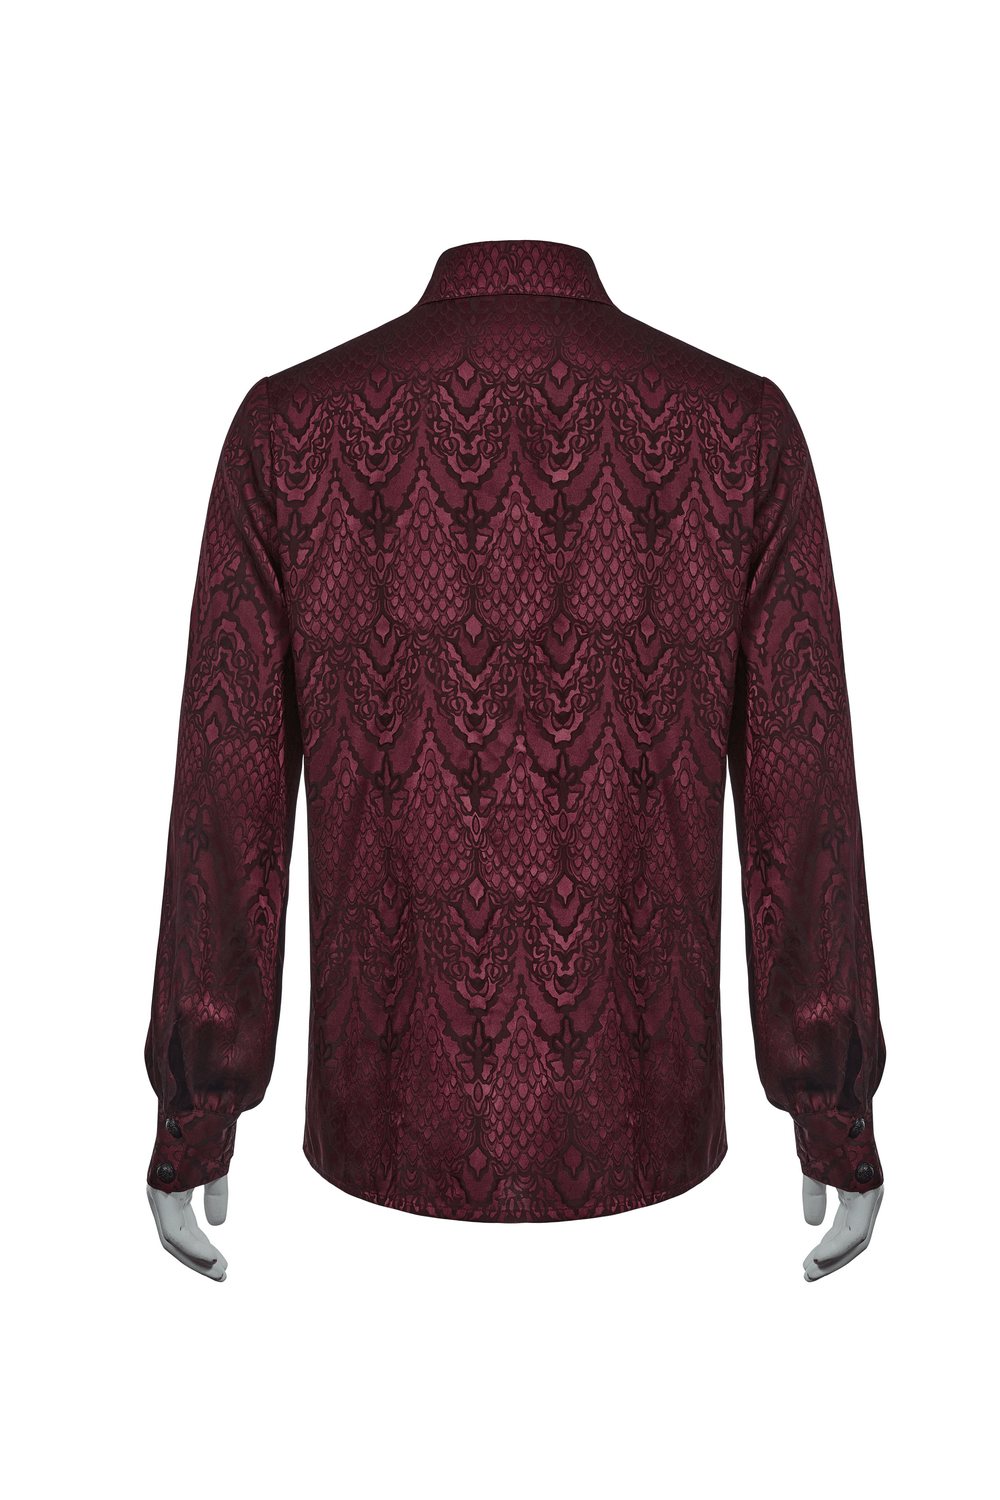 Vintage Long Sleeves Lace-Up Gothic Shirt for Men - HARD'N'HEAVY